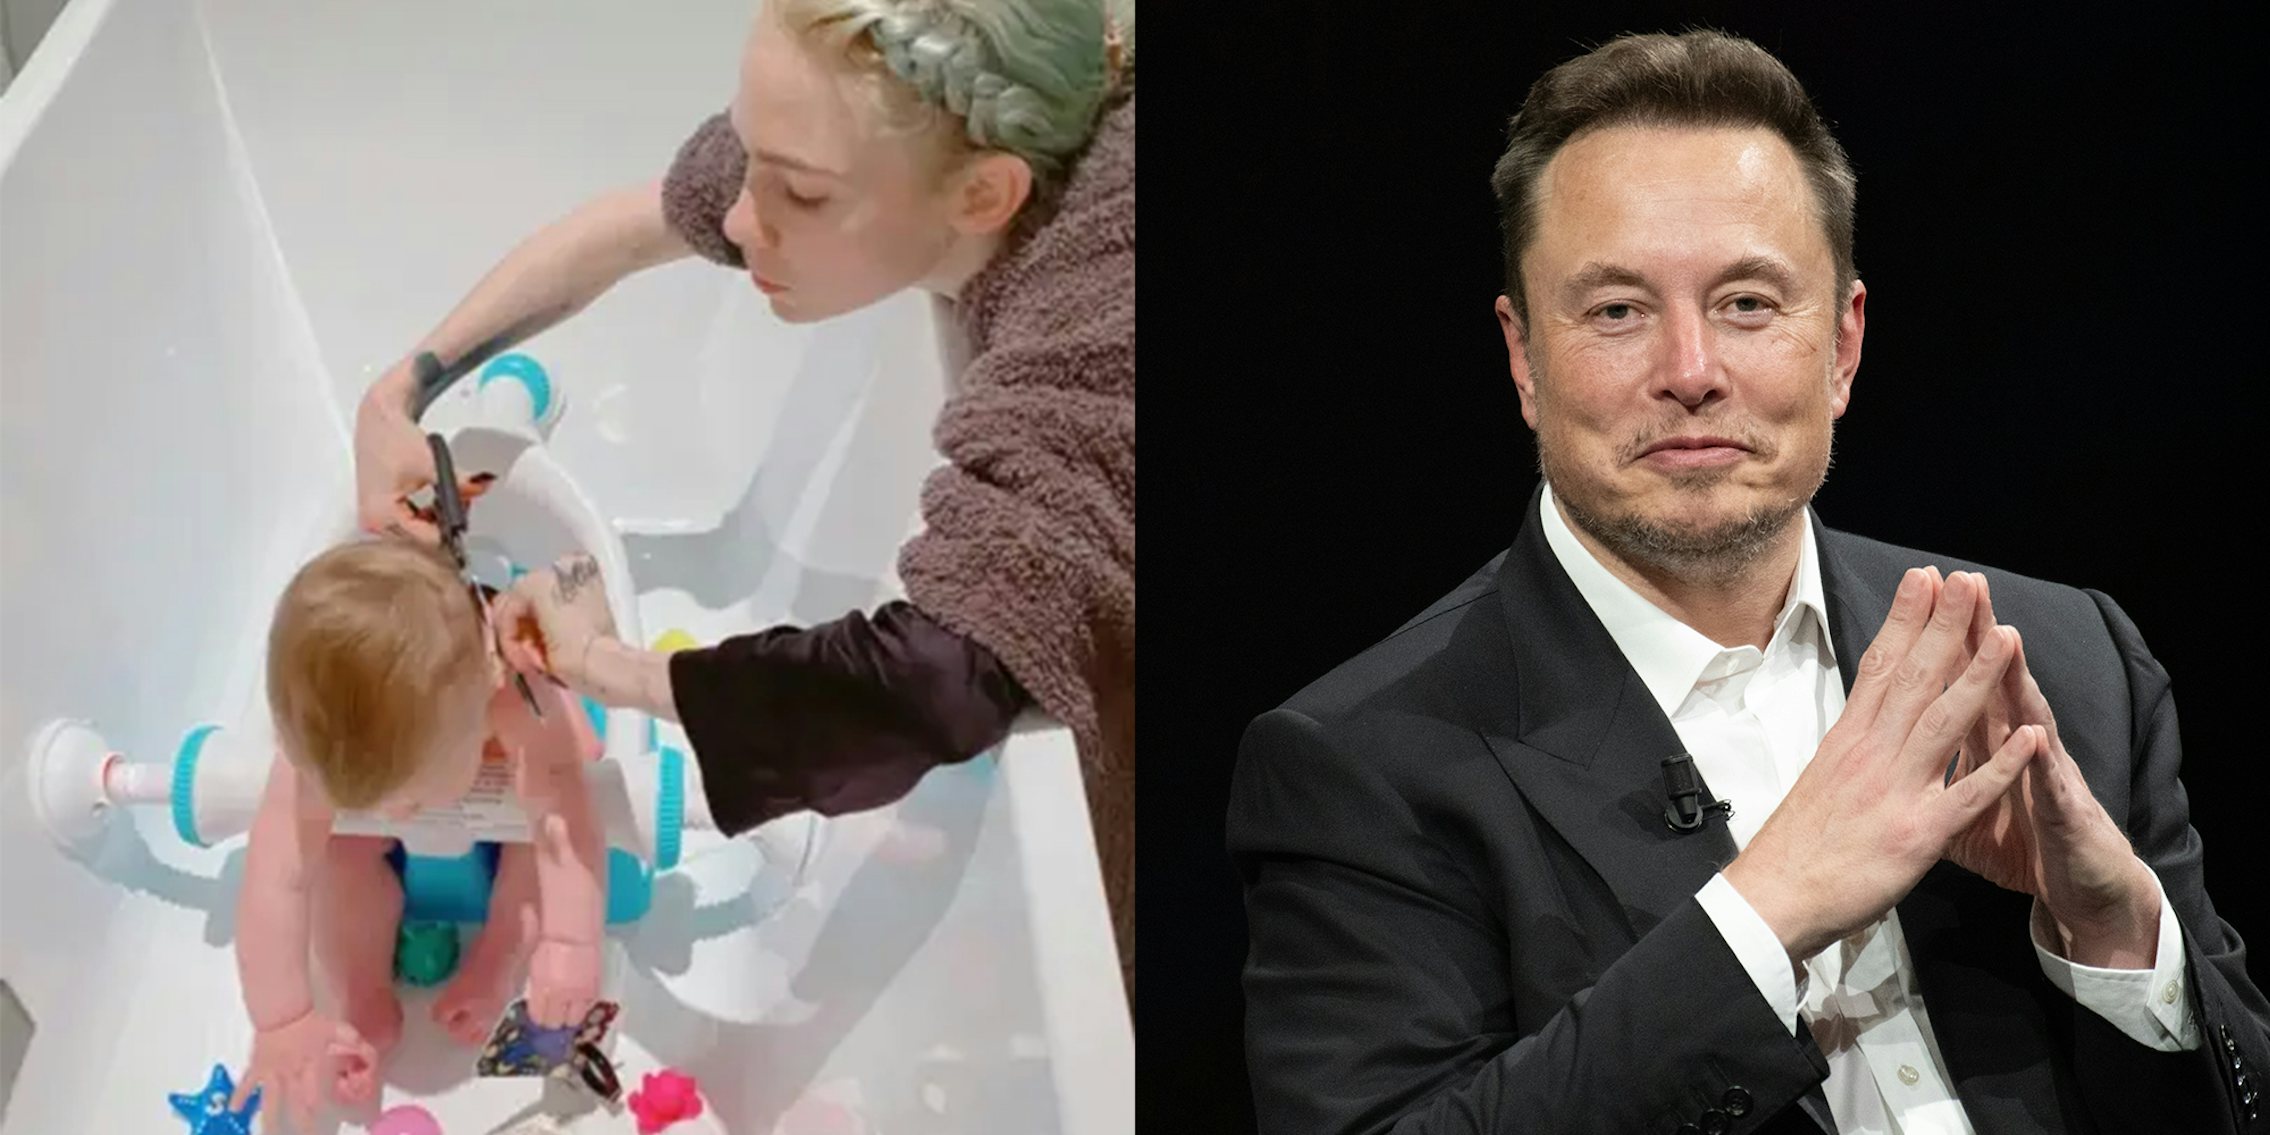 Grimes posts, then deletes, tweet begging Elon Musk to let her see her son, respond to her lawyer